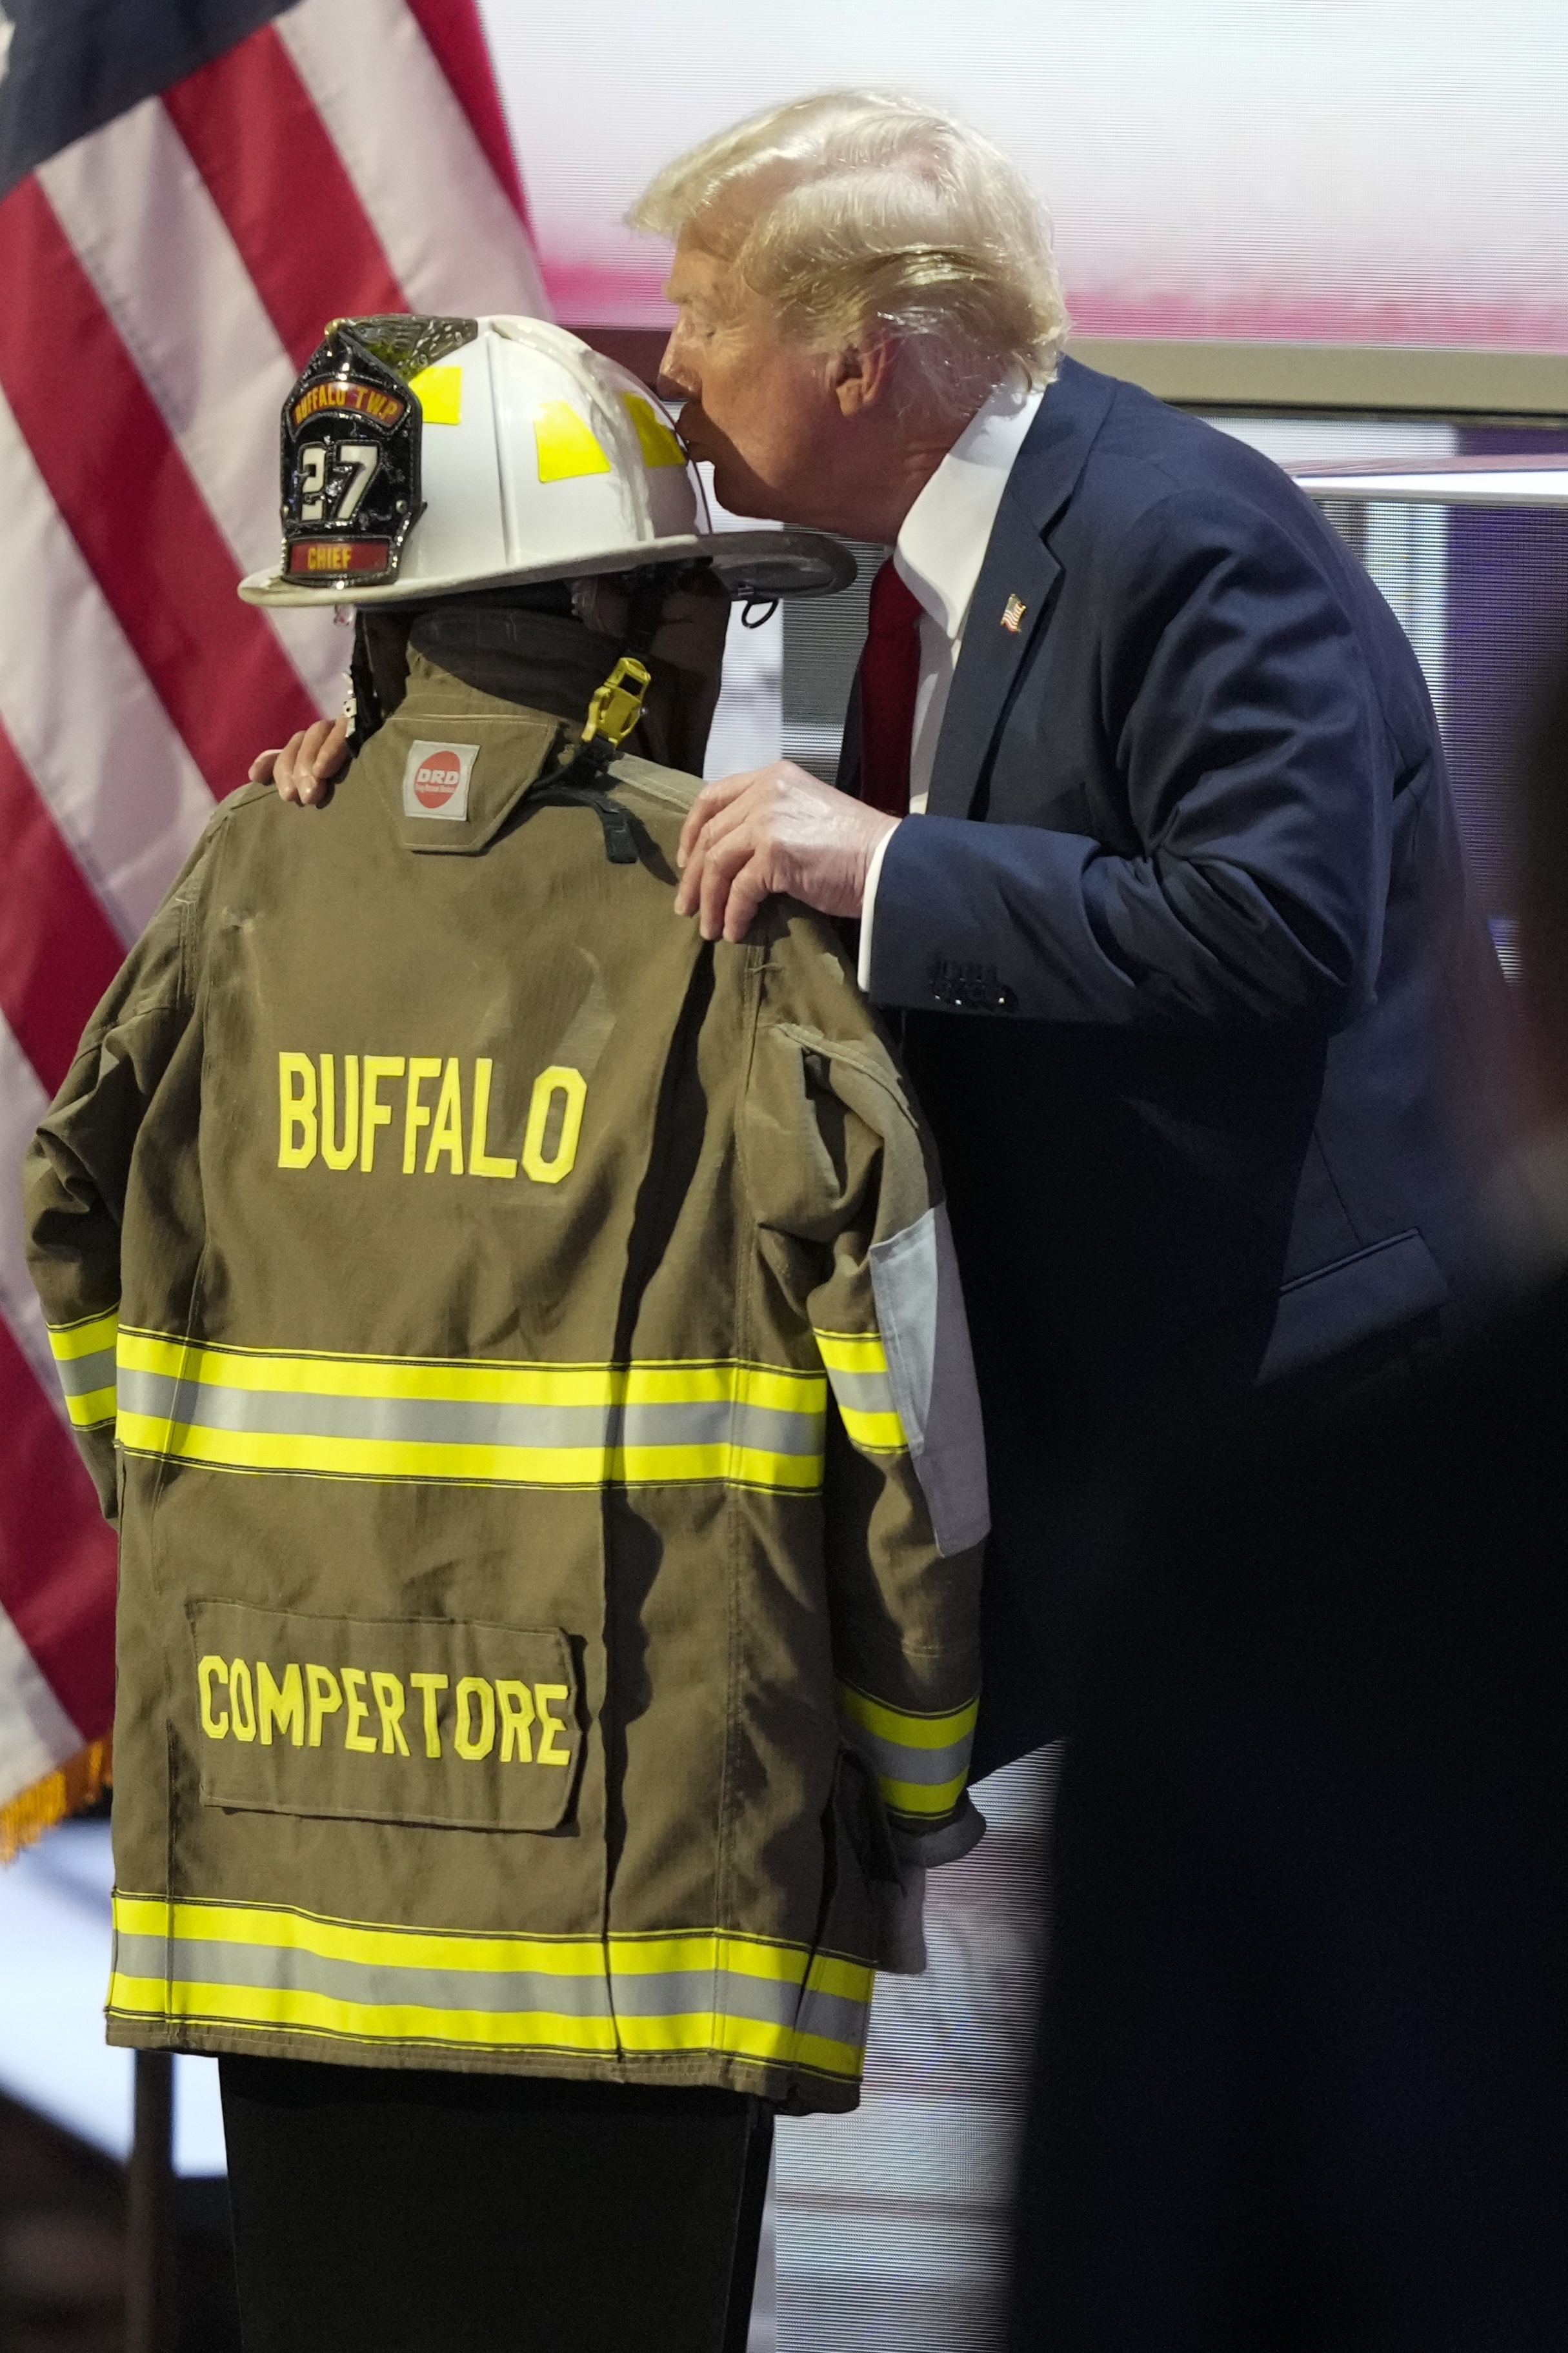 Republican presidential candidate former President Donald Trump kisses the helmet of Corey Comperatore during the Republican National Convention Thursday, July 18, 2024, in Milwaukee. (AP Photo/Charles Rex Arbogast)